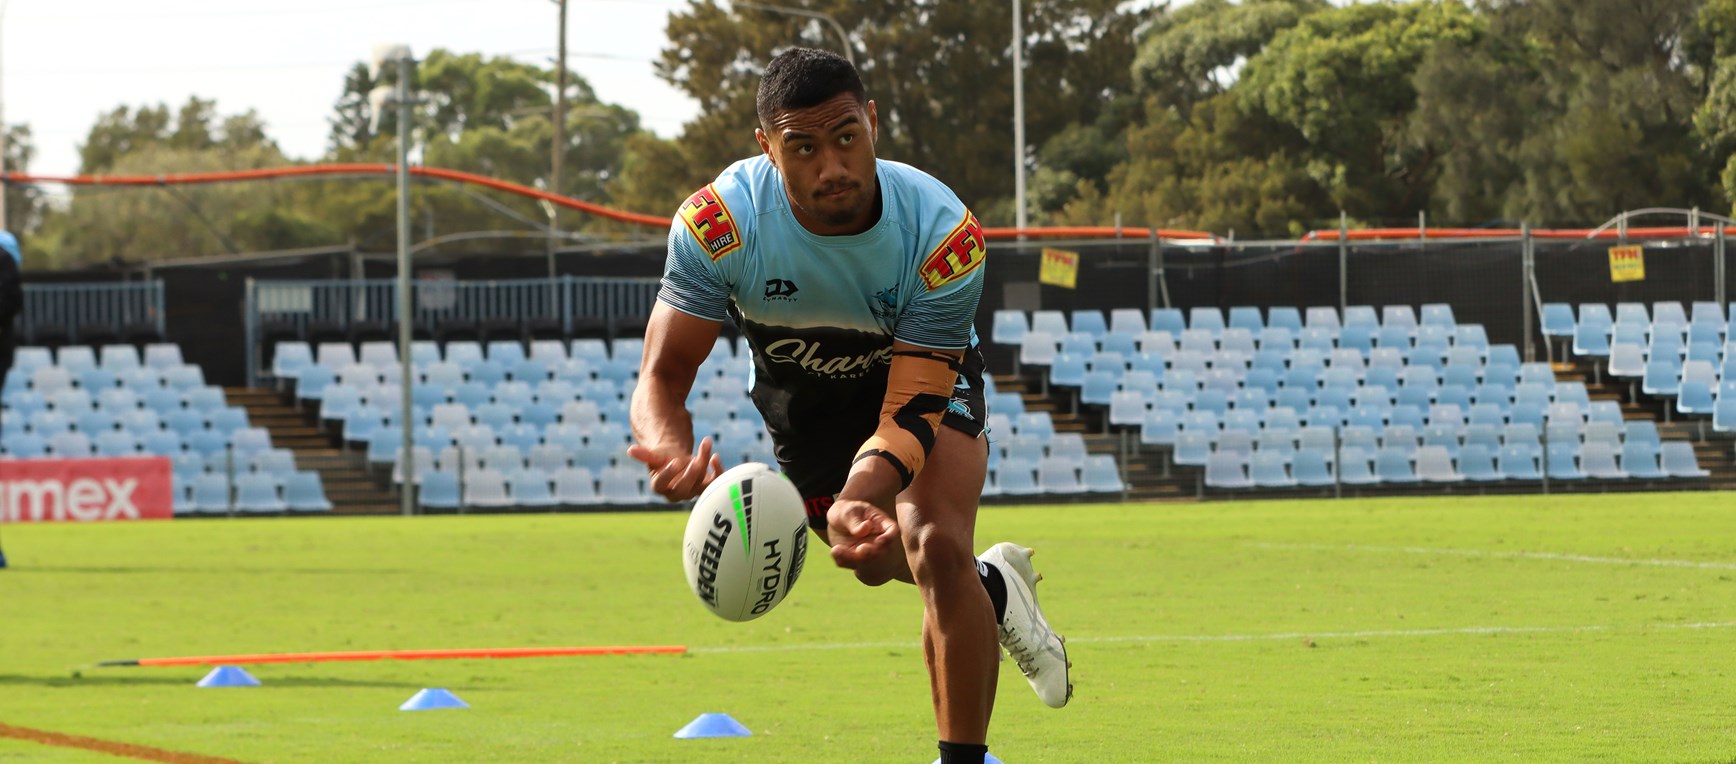 Sharks prepare for the Raiders